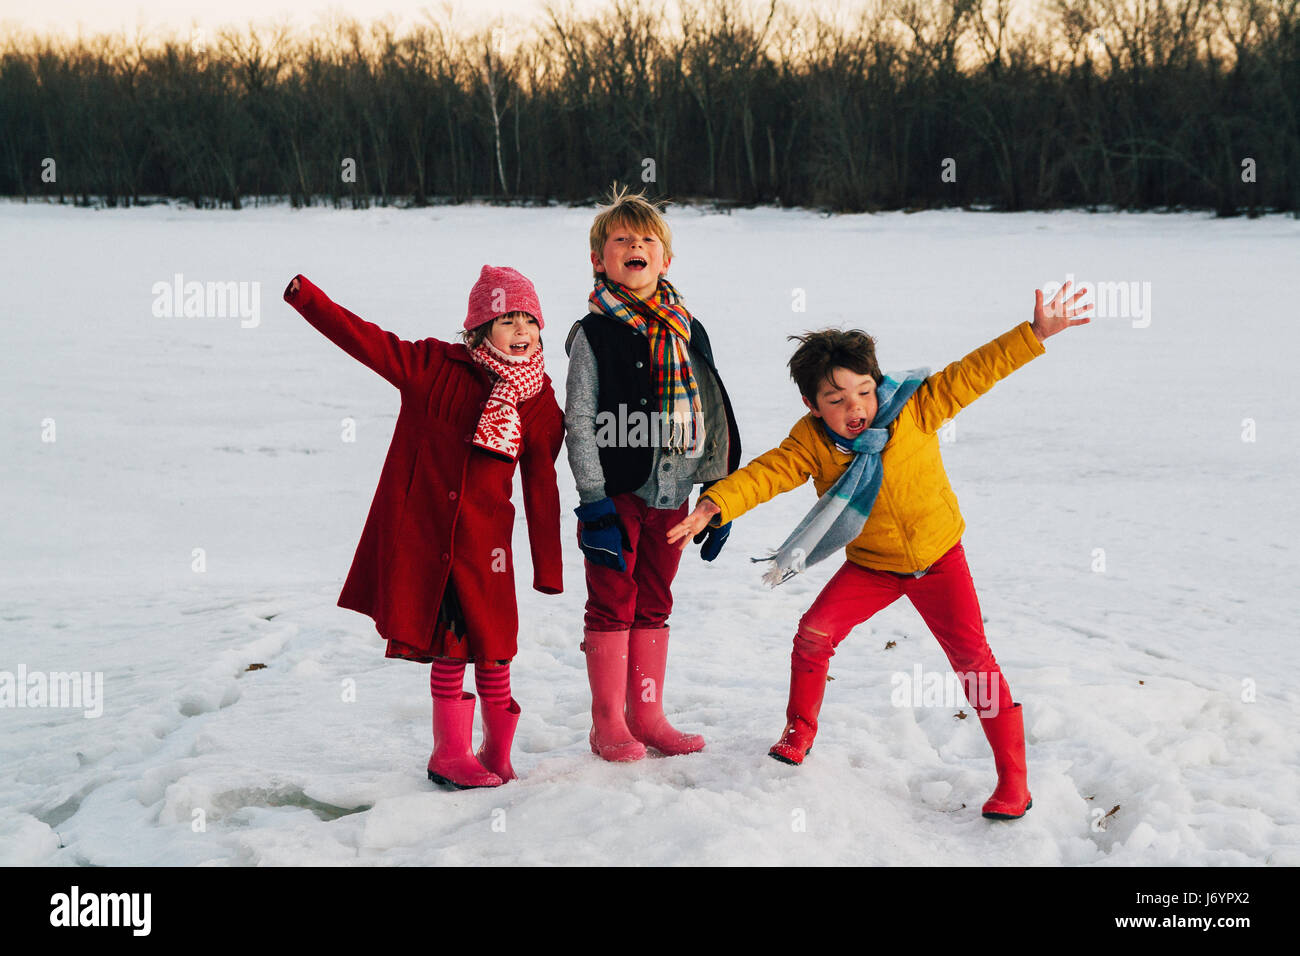 Three children standing in the snow with arms outstretched shouting Stock Photo